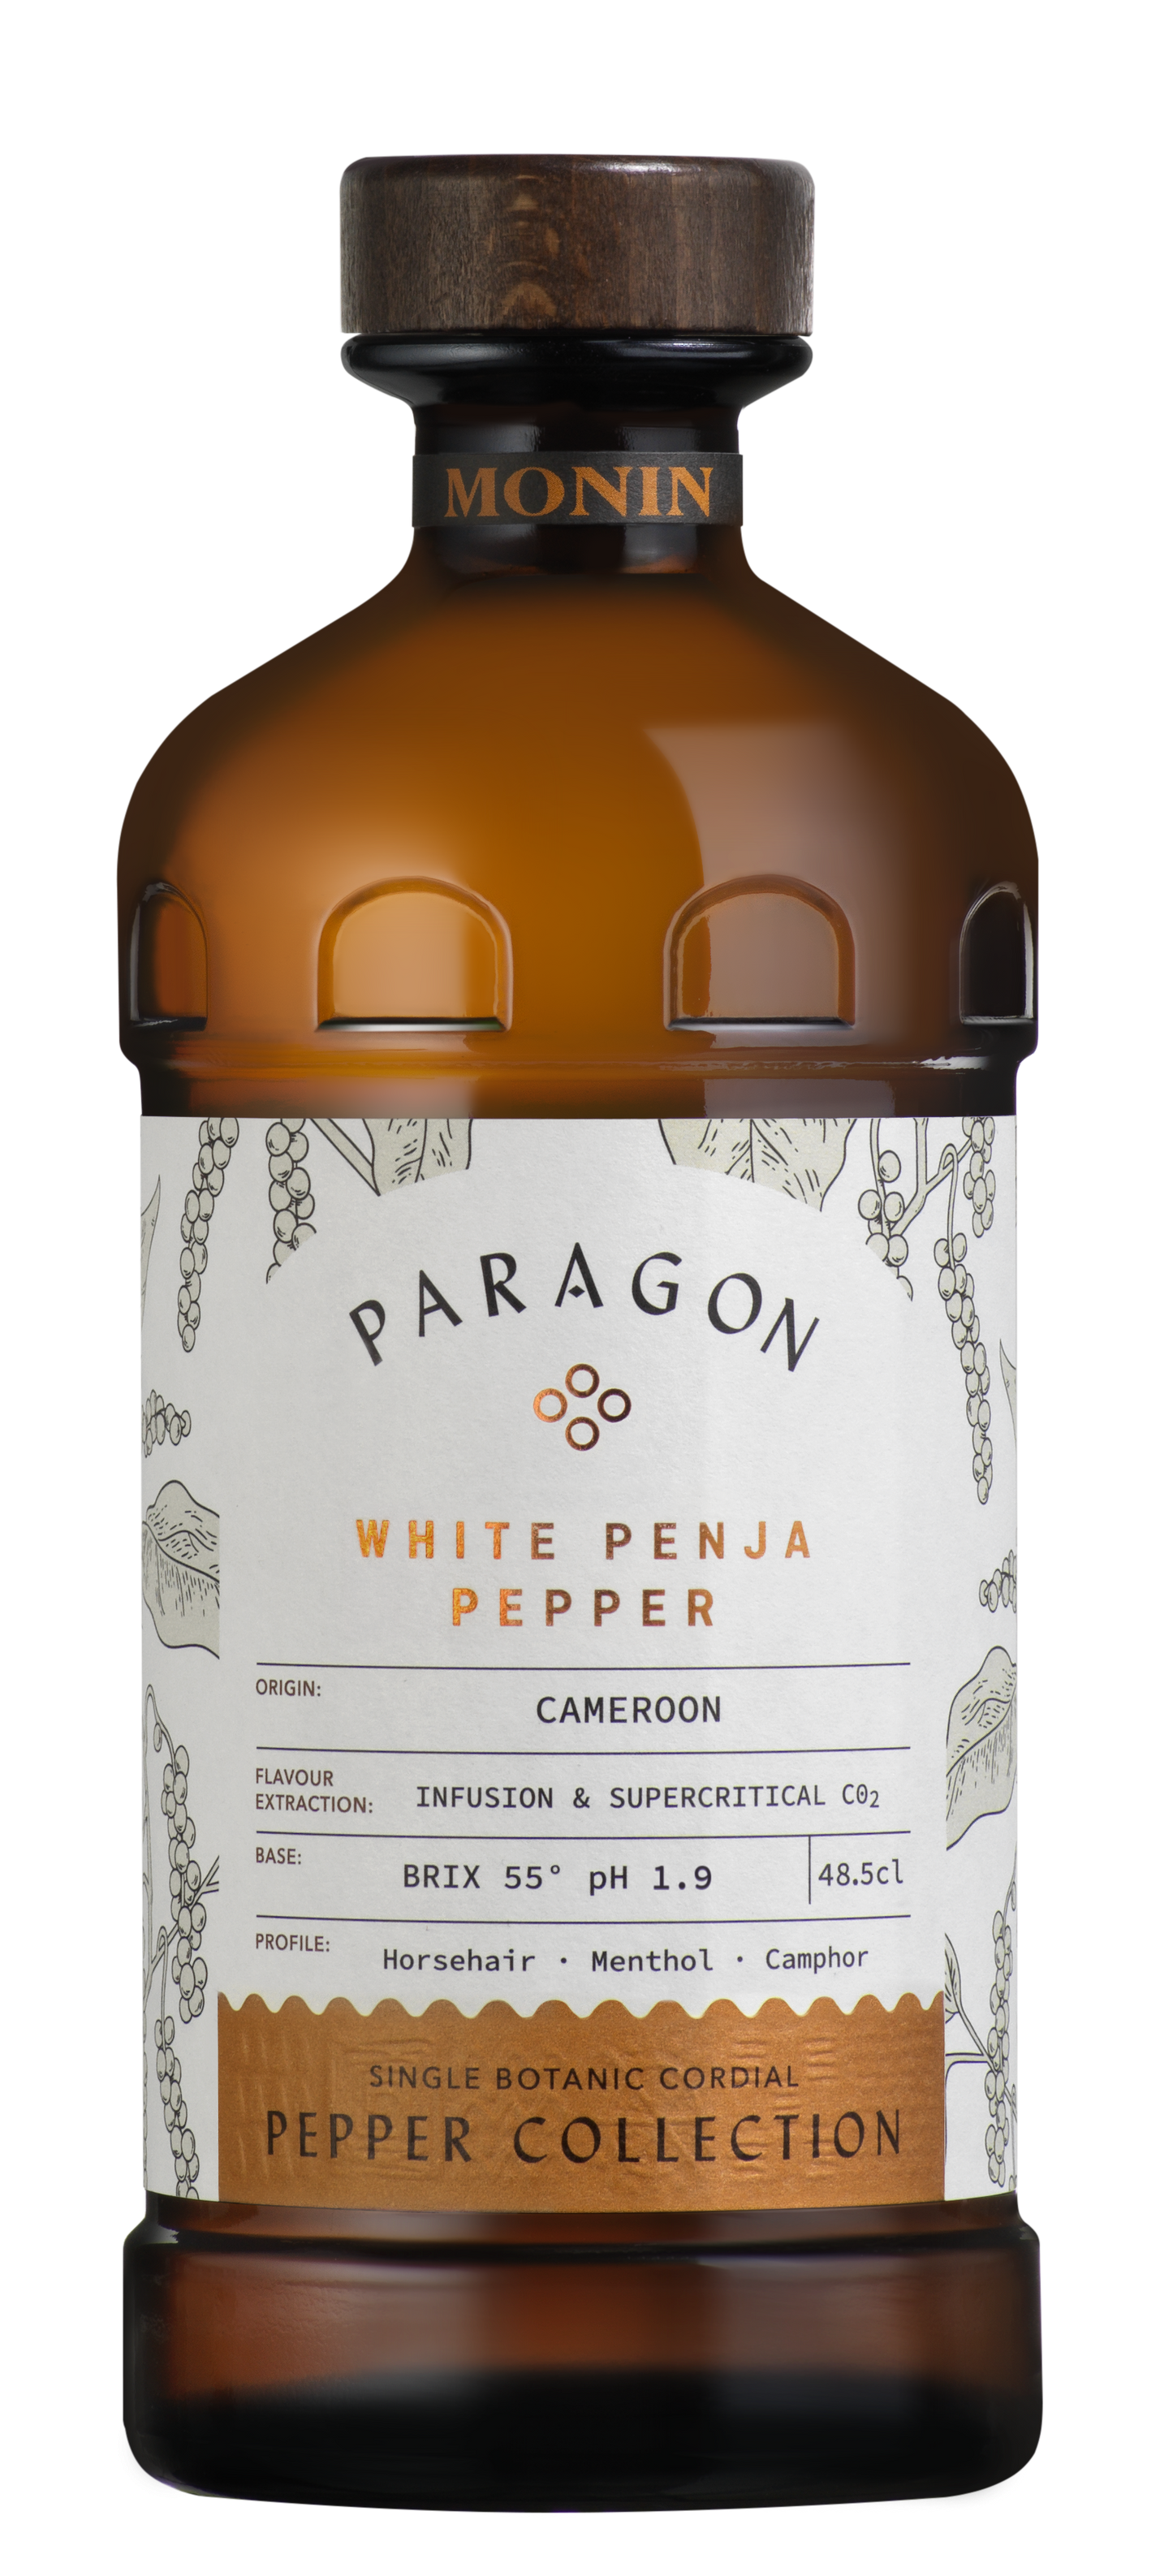 PARAGON White Penja Pepper Cordial 48.5cl